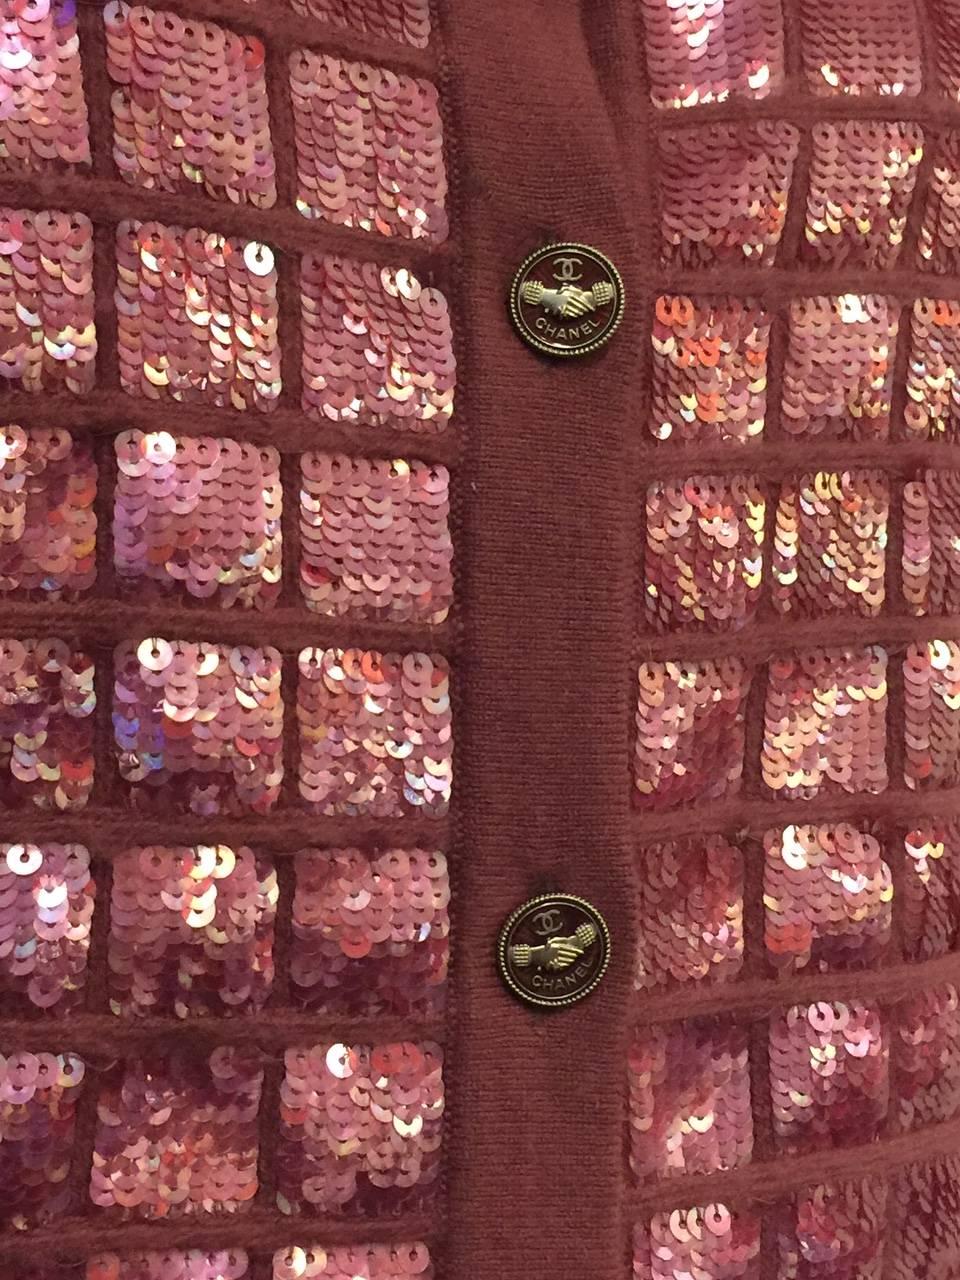 Women's 2008 Chanel Med. Burgundy Cashmere Cardigan Iridescent Sequin Embroidery 